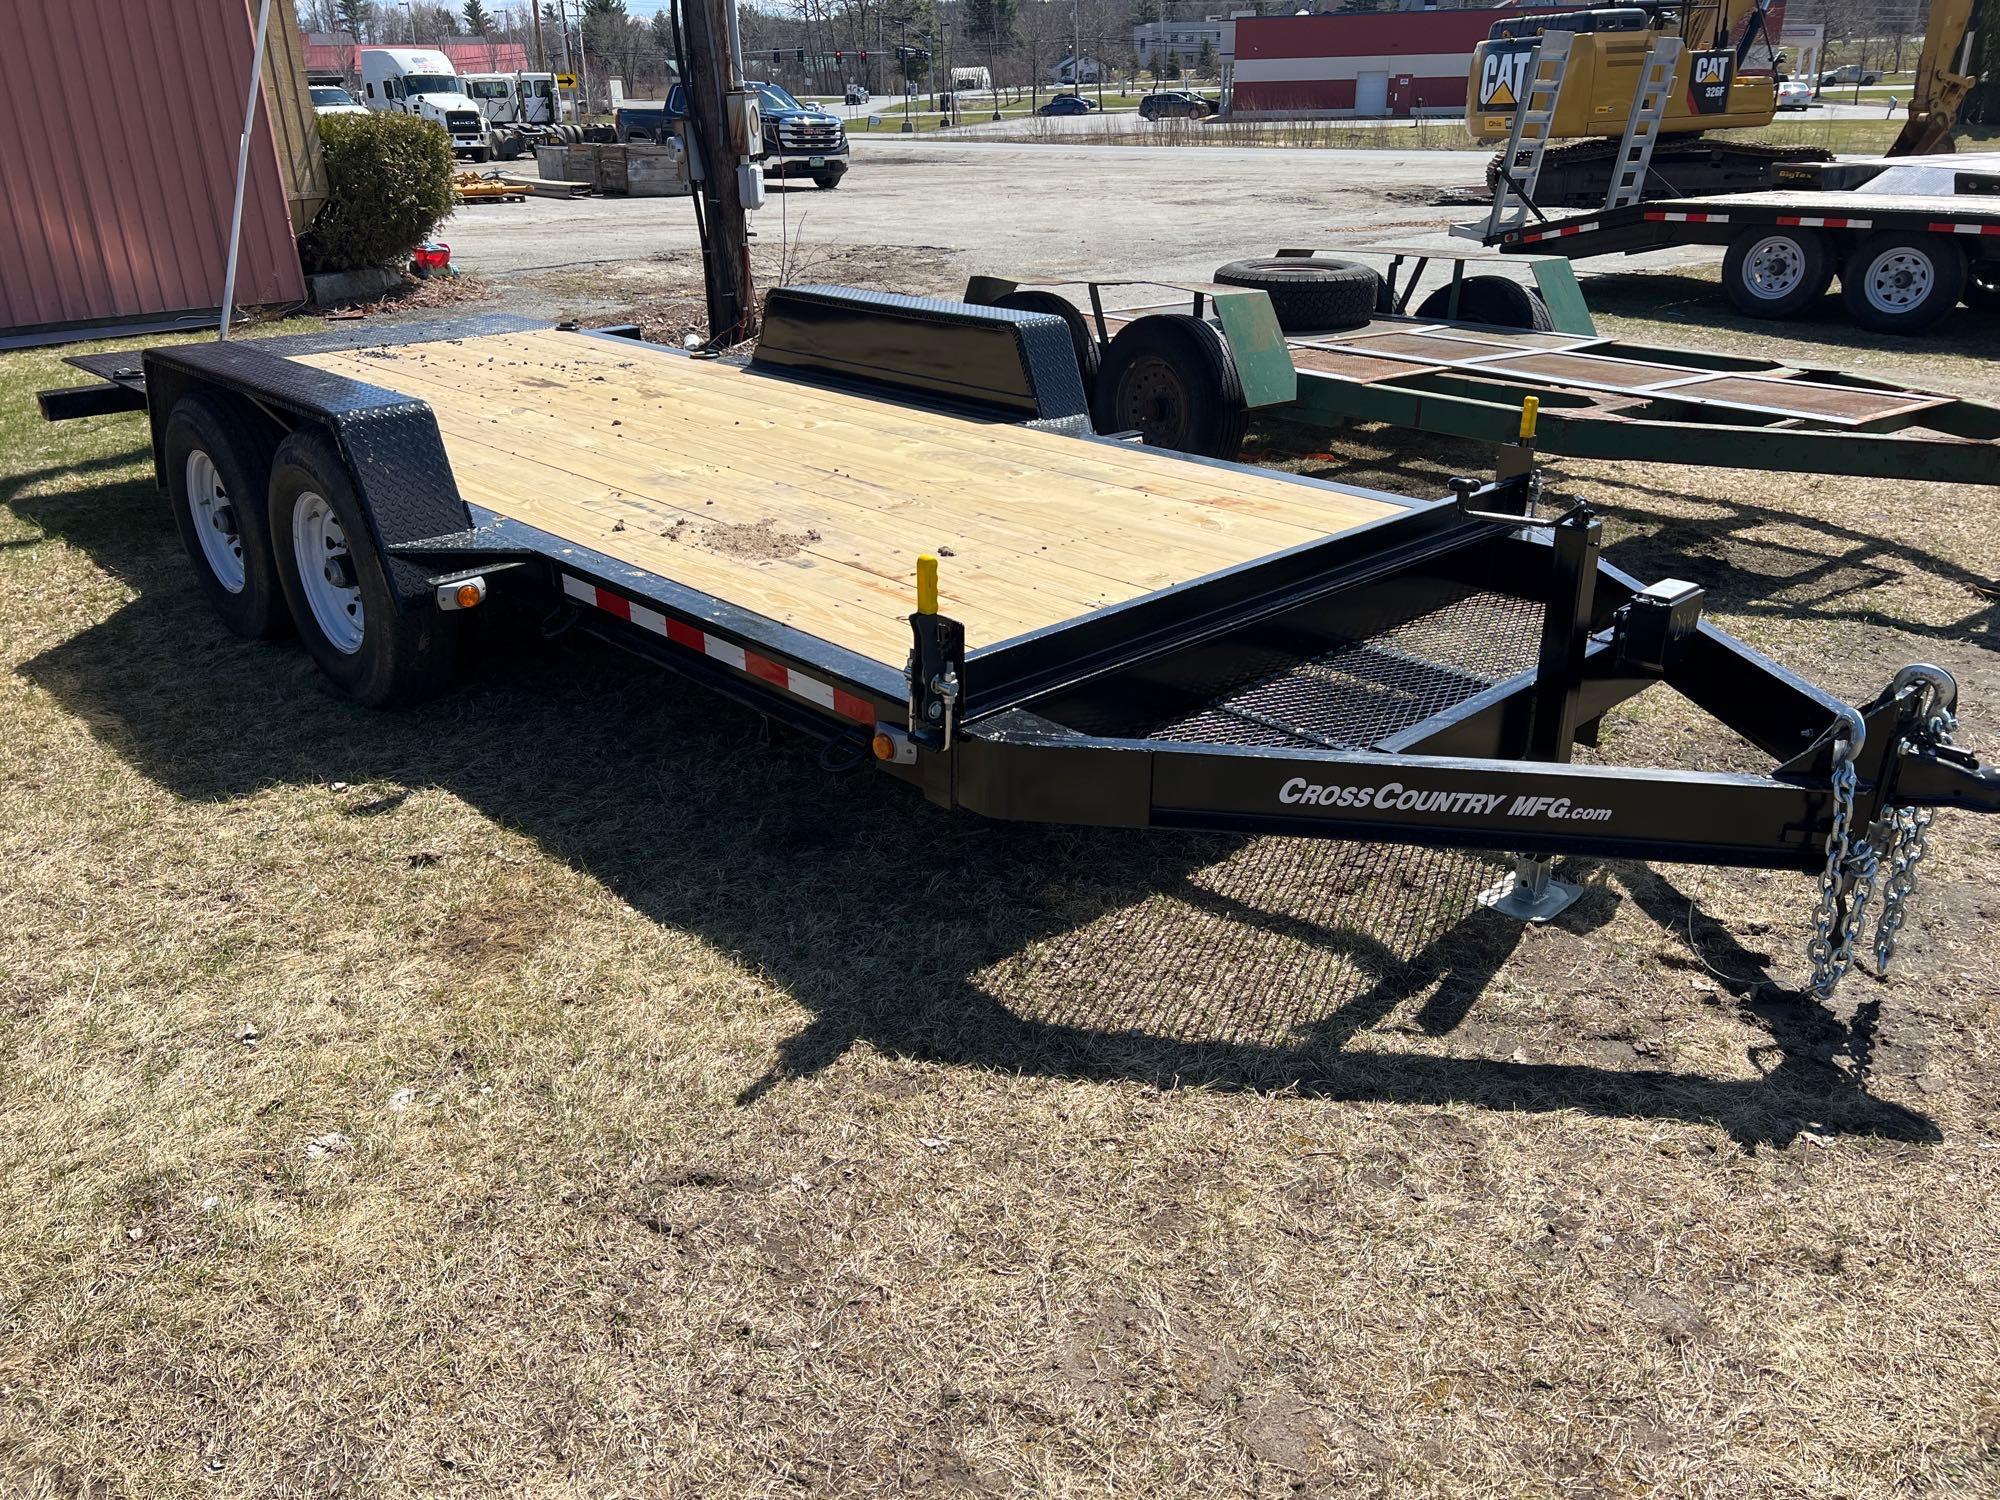 NEW 2024 CROSS COUNTRY 16FT. TAGALONG TRAILER VN:643153 equipped with 6...ton capacity, tilt deck,